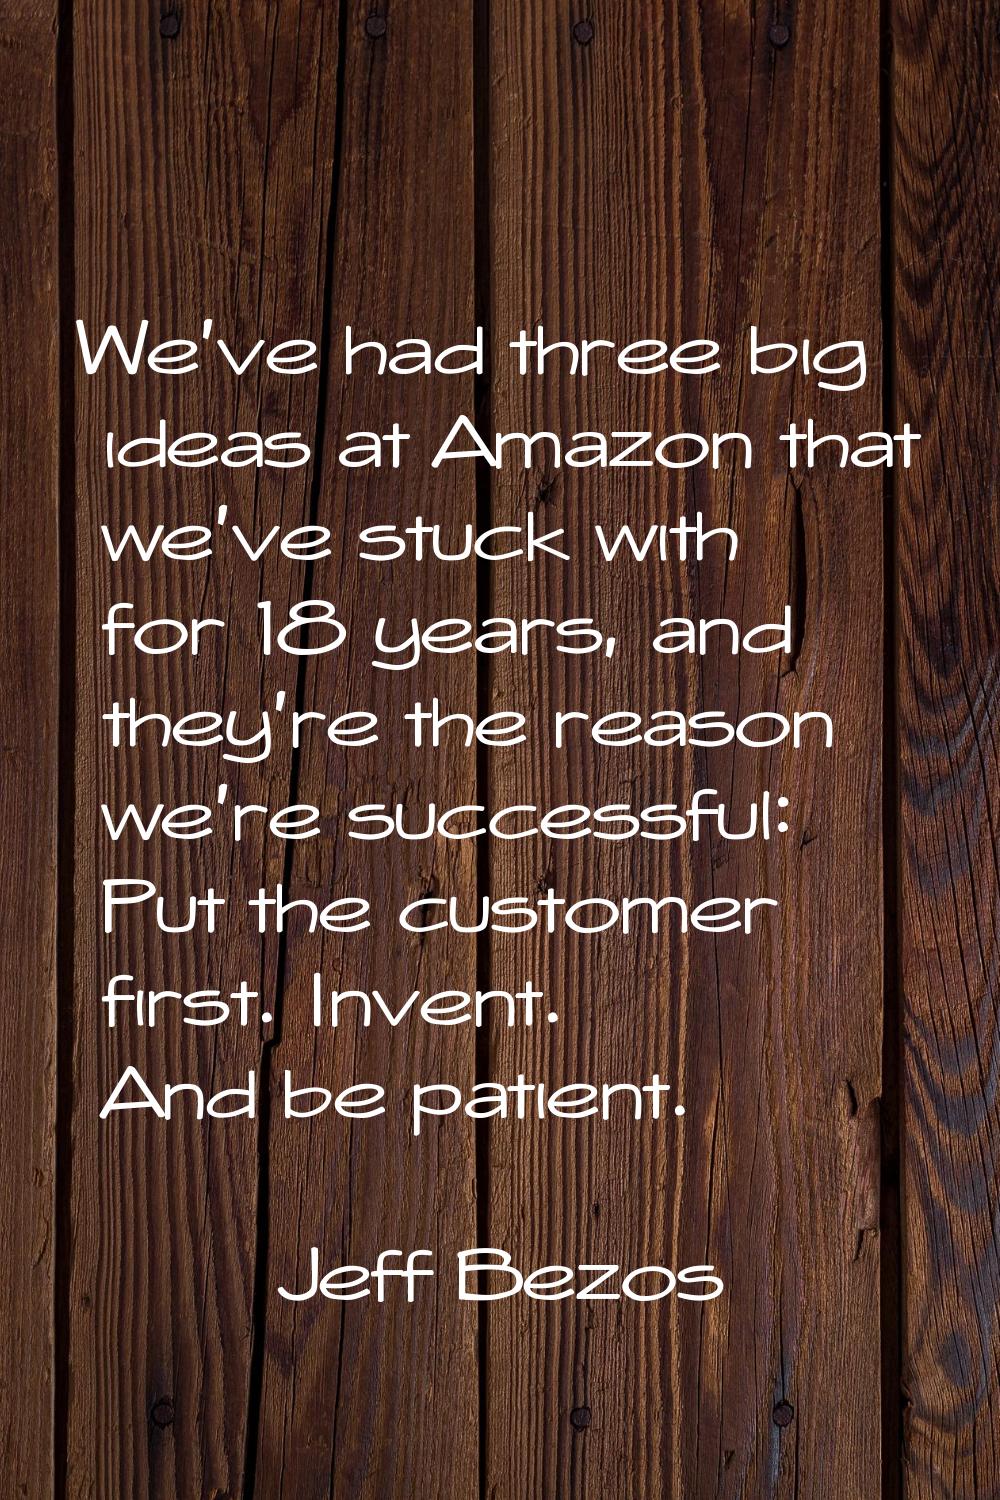 We've had three big ideas at Amazon that we've stuck with for 18 years, and they're the reason we'r